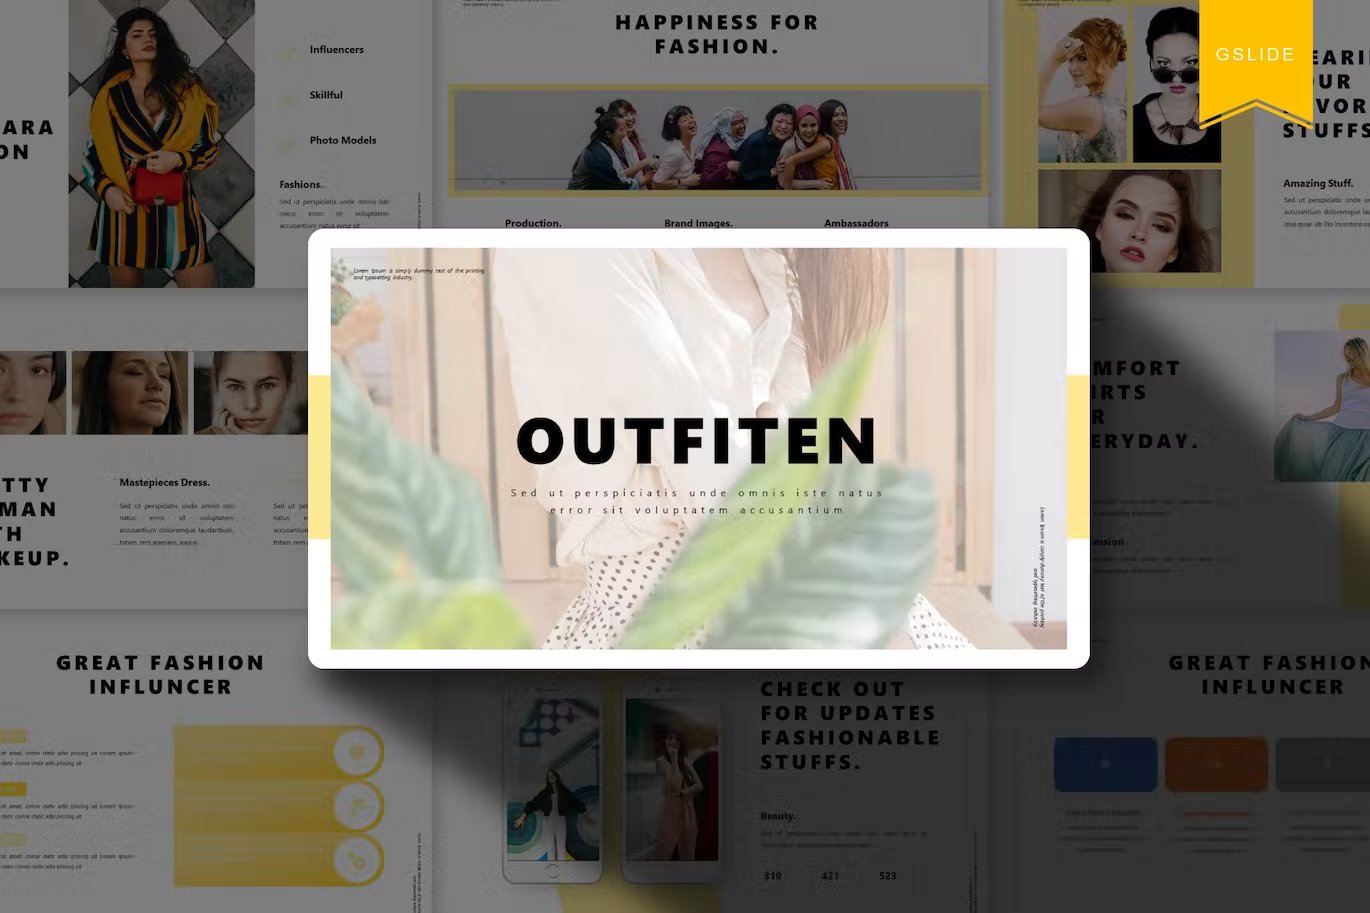 Black lettering "Outfiten" on the background of different slides.